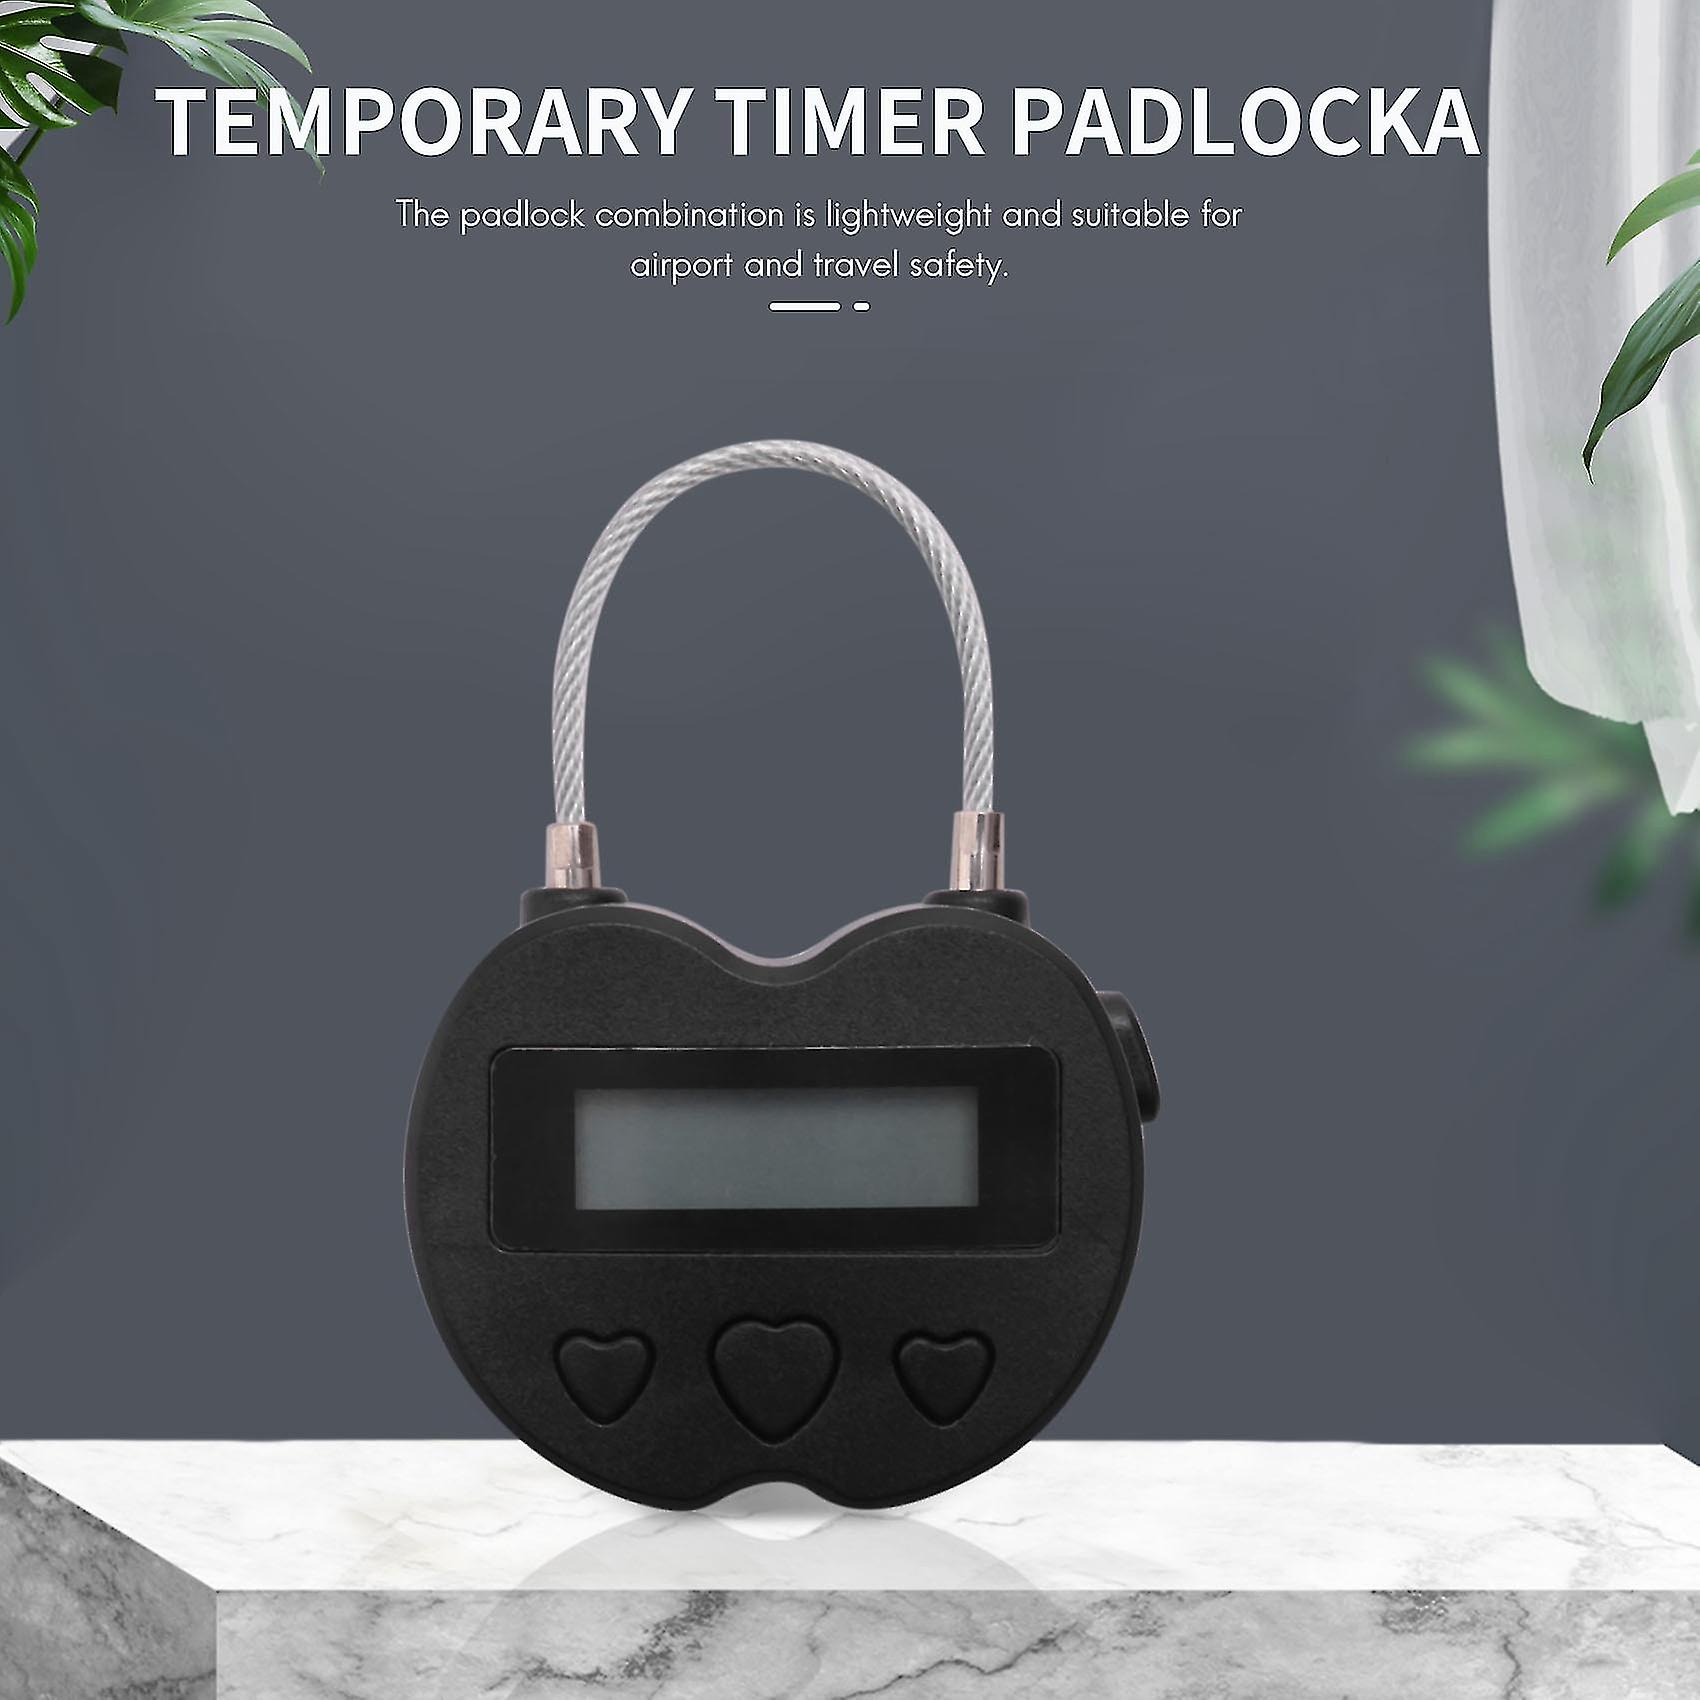 Smart Time Lock Lcd Display Time Lock Usb Rechargeable Temporary Timer Padlock Travel Electronic Ti